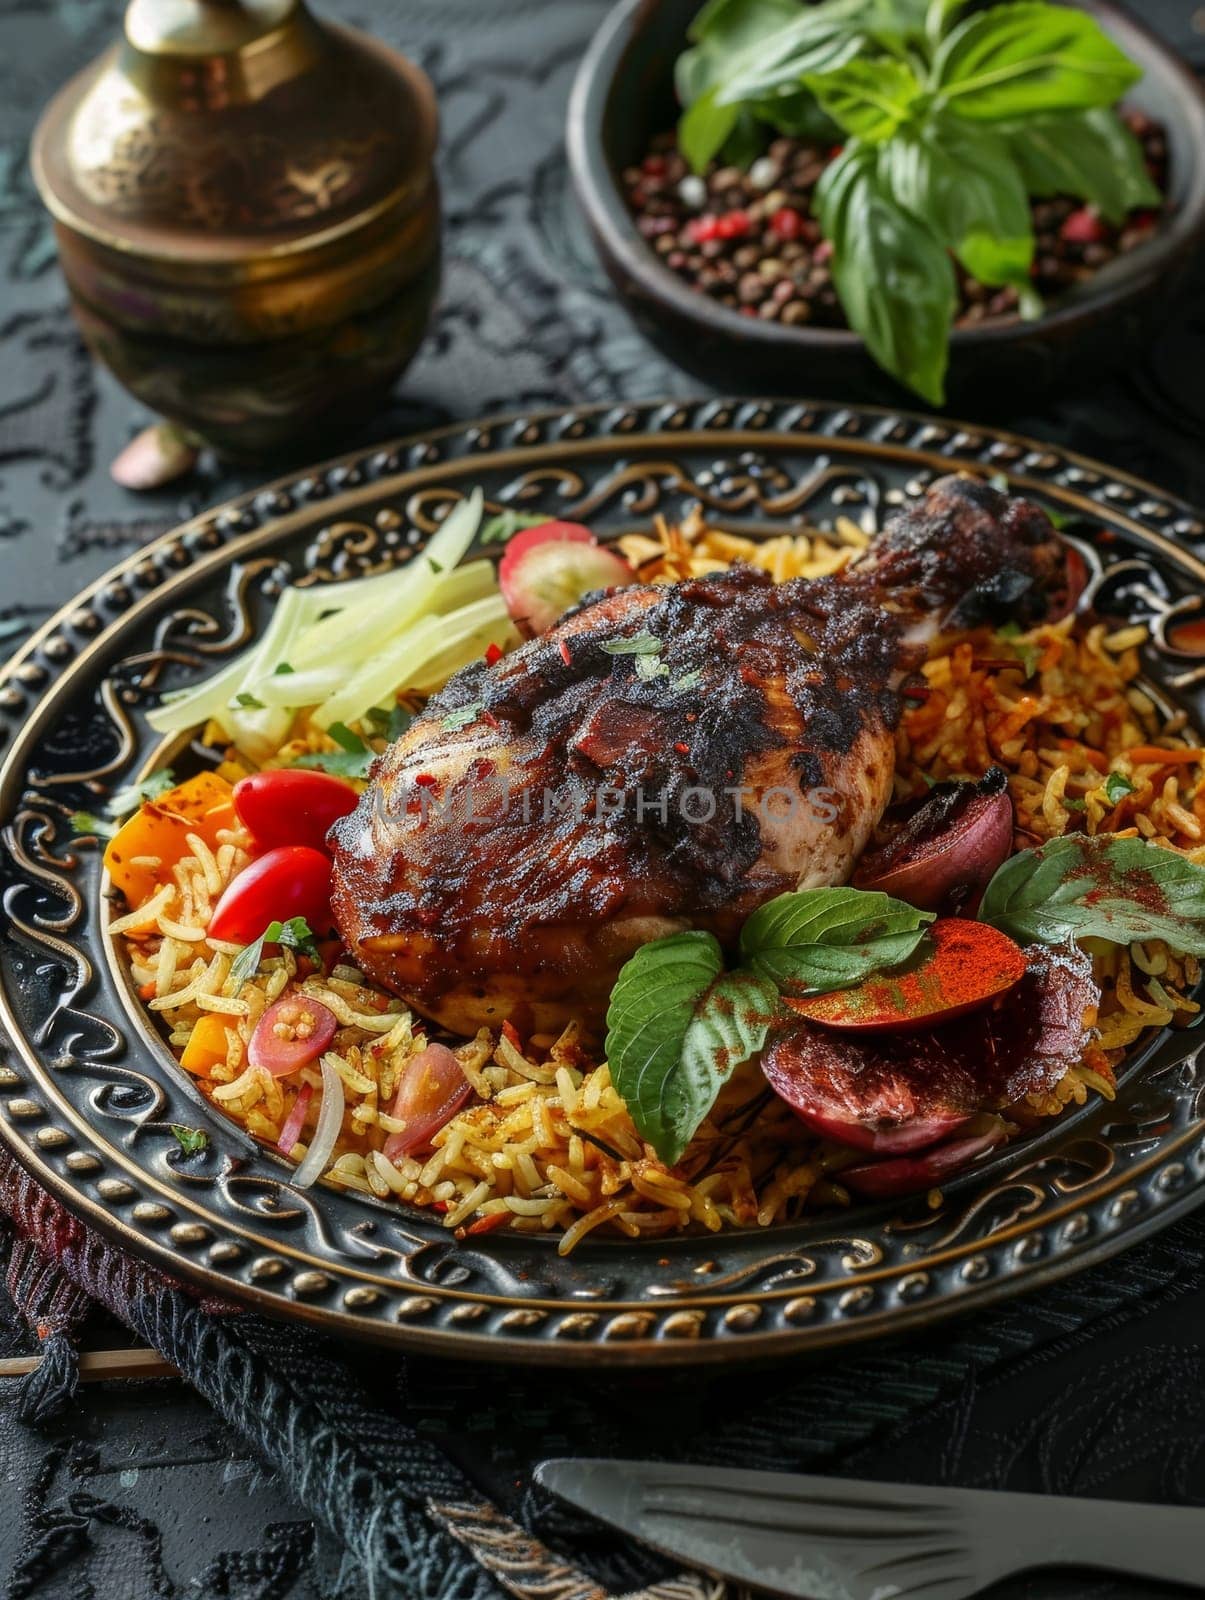 Authentic Kuwaiti machboos, a fragrant and flavorful spiced rice dish with tender chicken or lamb, beautifully presented on a decorative plate - a mouthwatering representation of the traditions. by sfinks